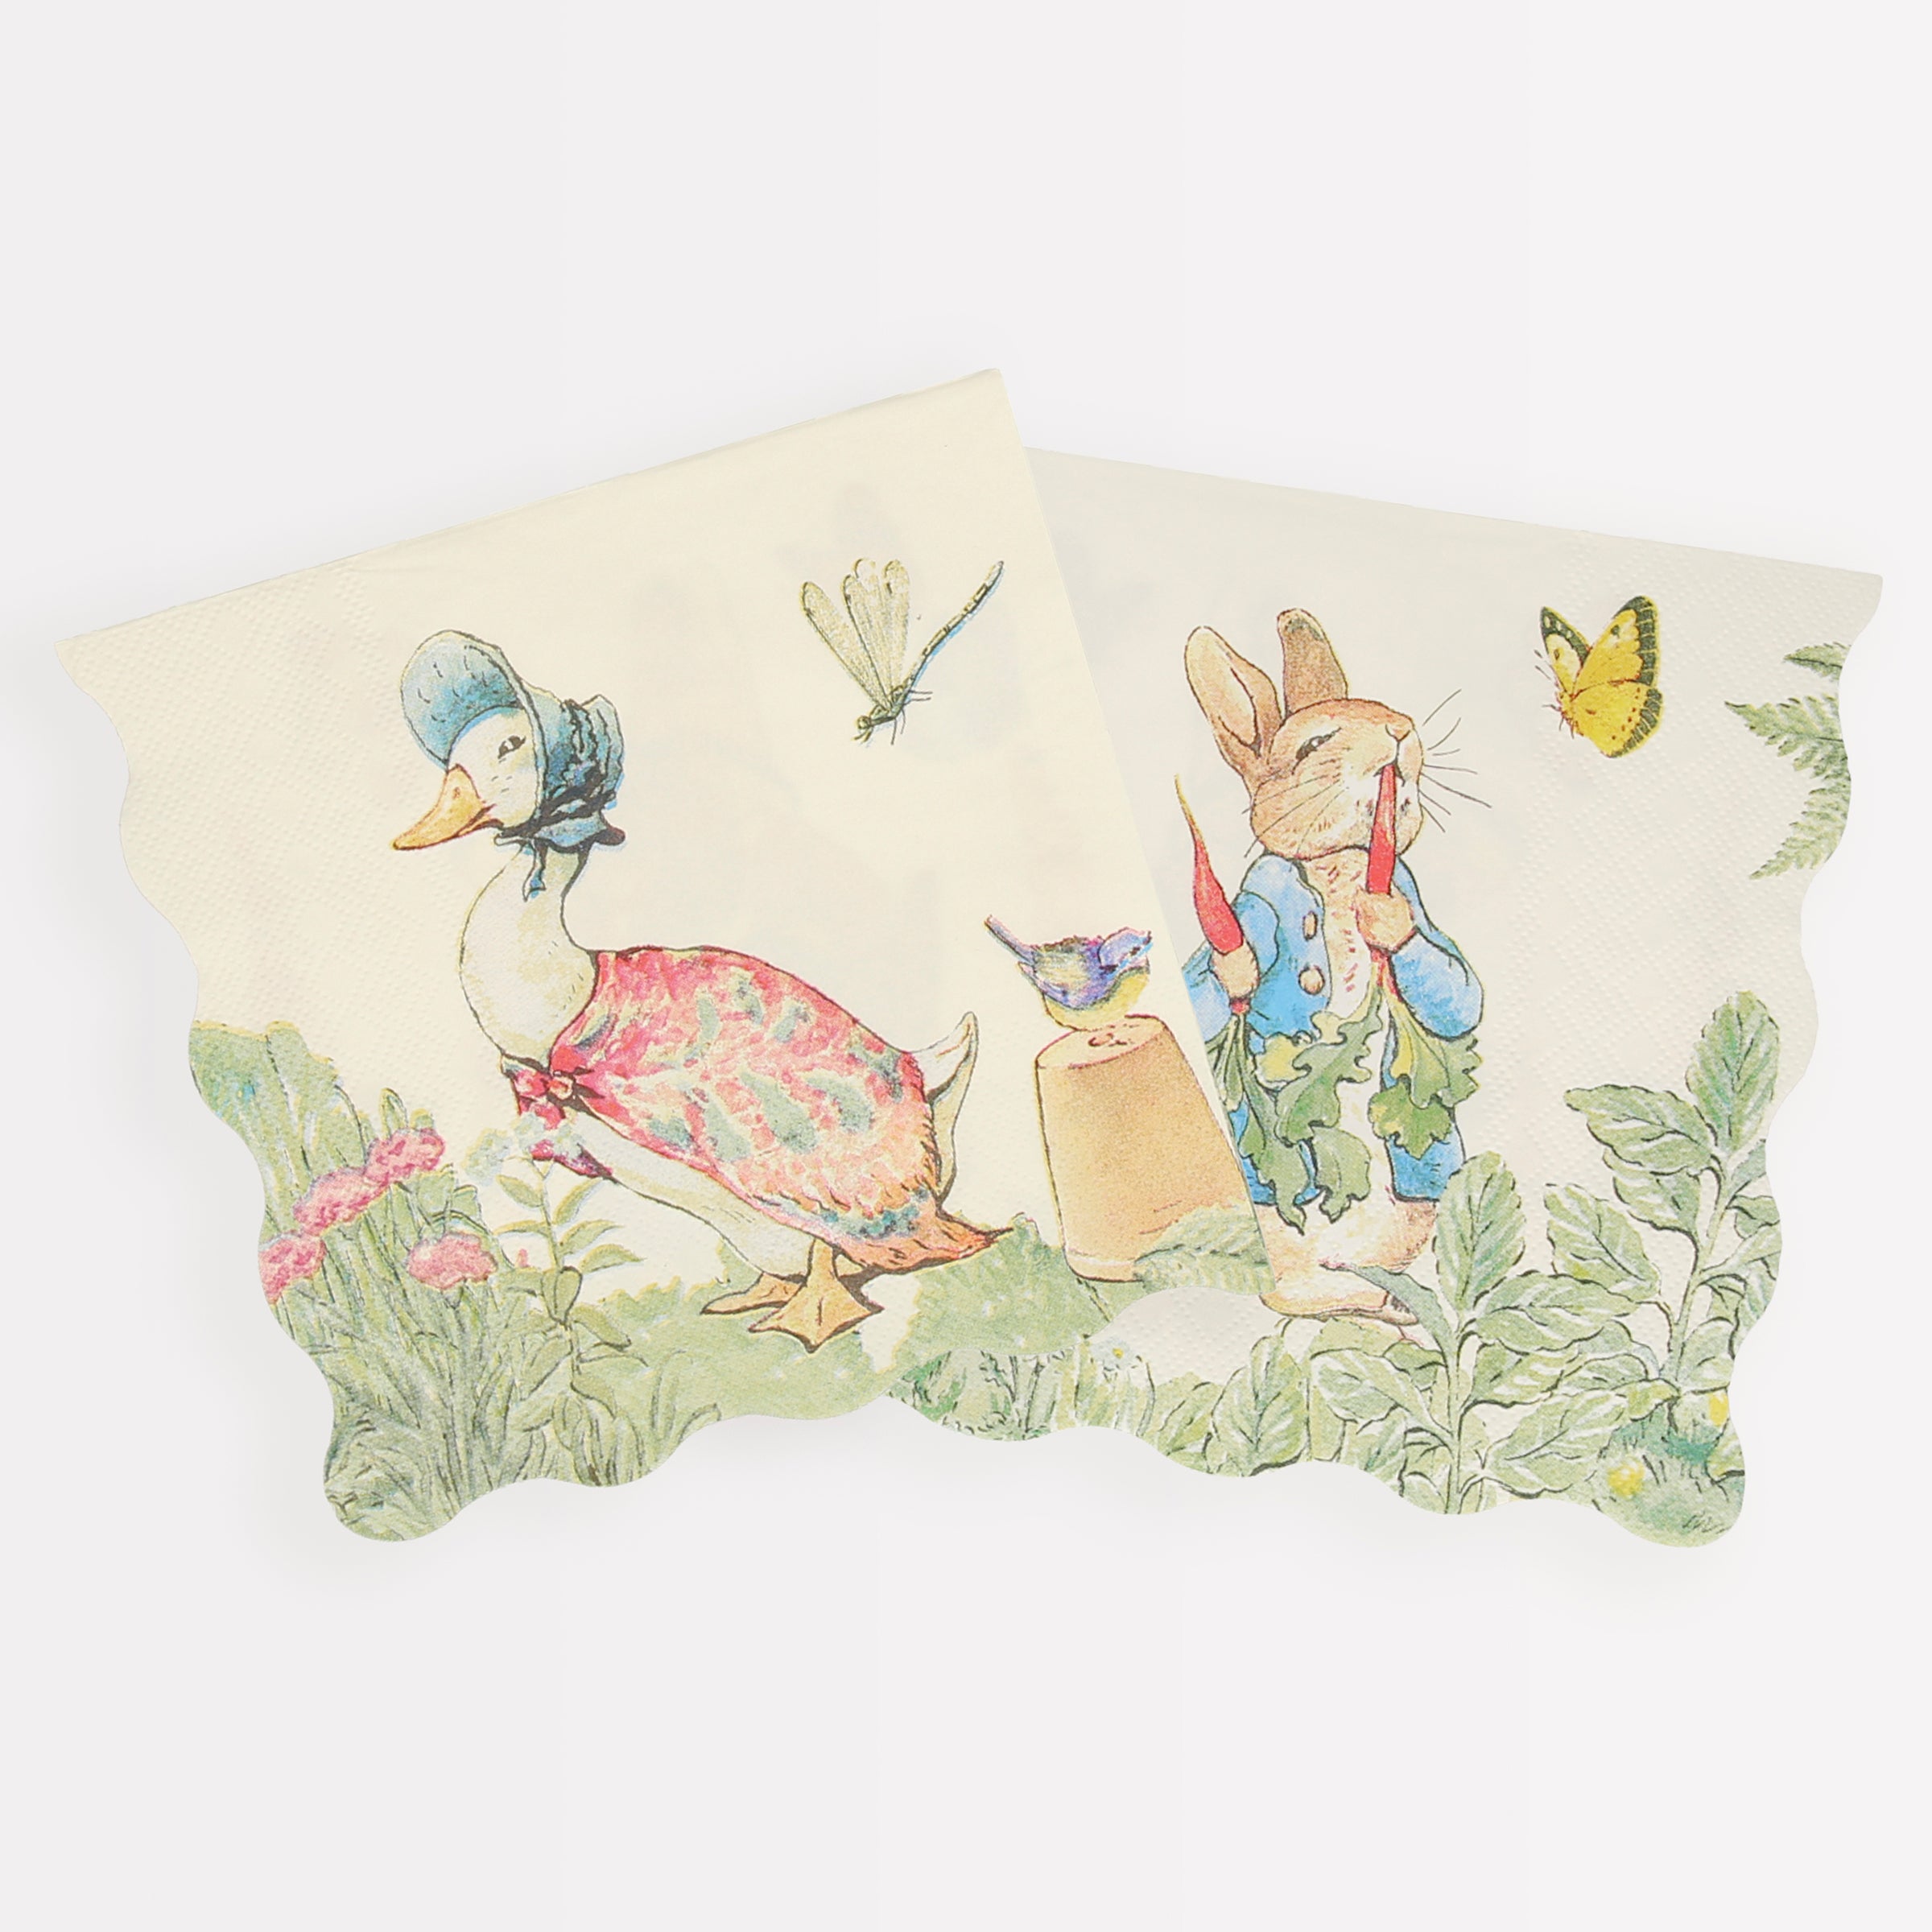 These gorgeous napkins are perfect for a Peter Rabbit party or as Easter napkins.